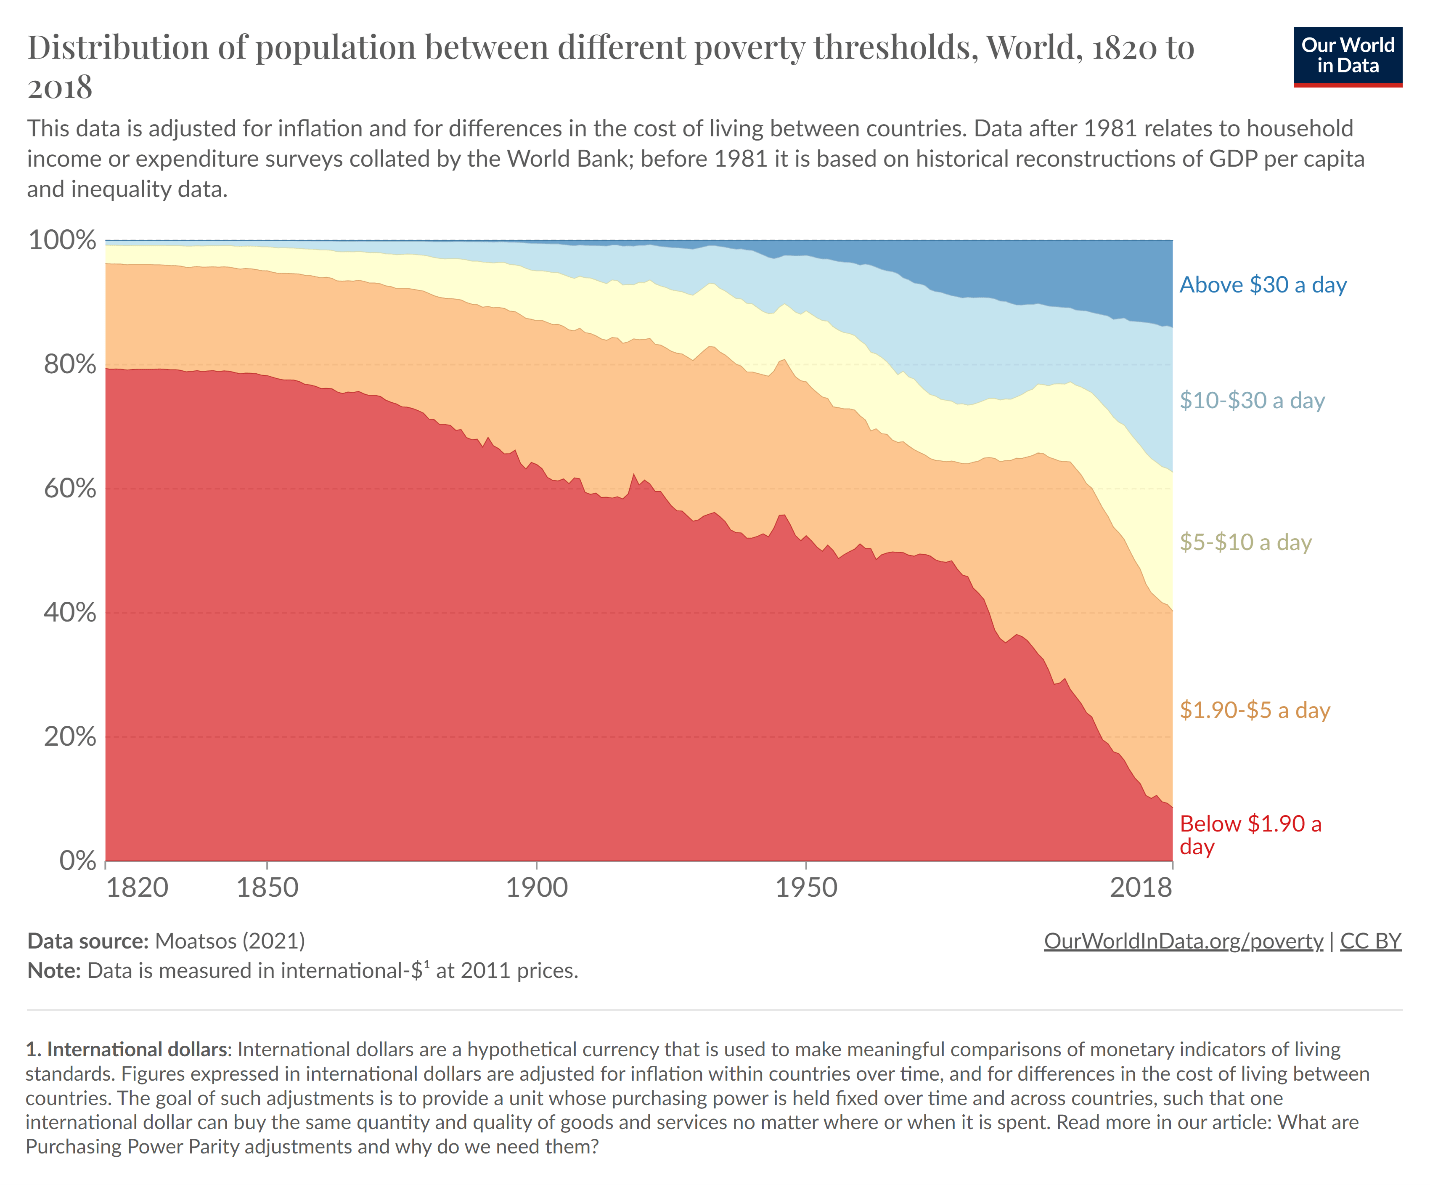 A chart showing the share of the population at various levels of income over time.